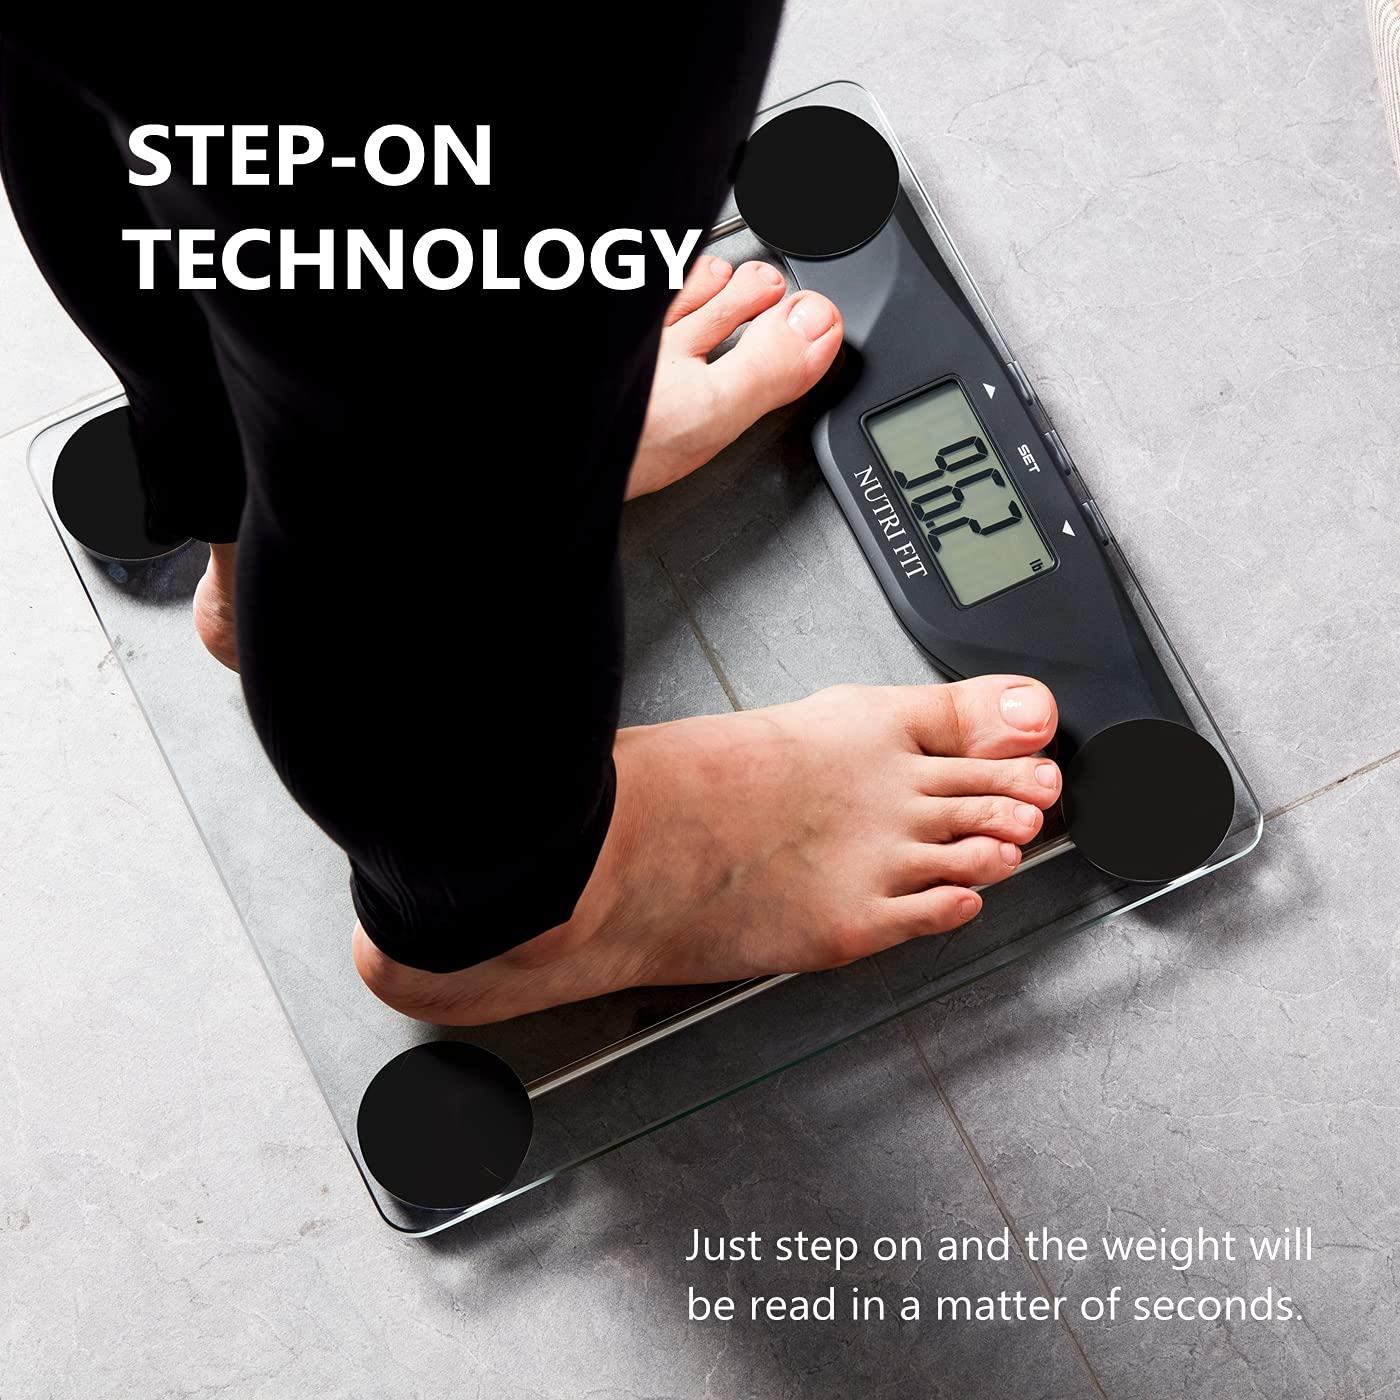 digital body weight bathroom scale bmi, accurate weight measurements scale,large  backlight display and step-on technology,400 pounds,body tape measure  included (bmi) 